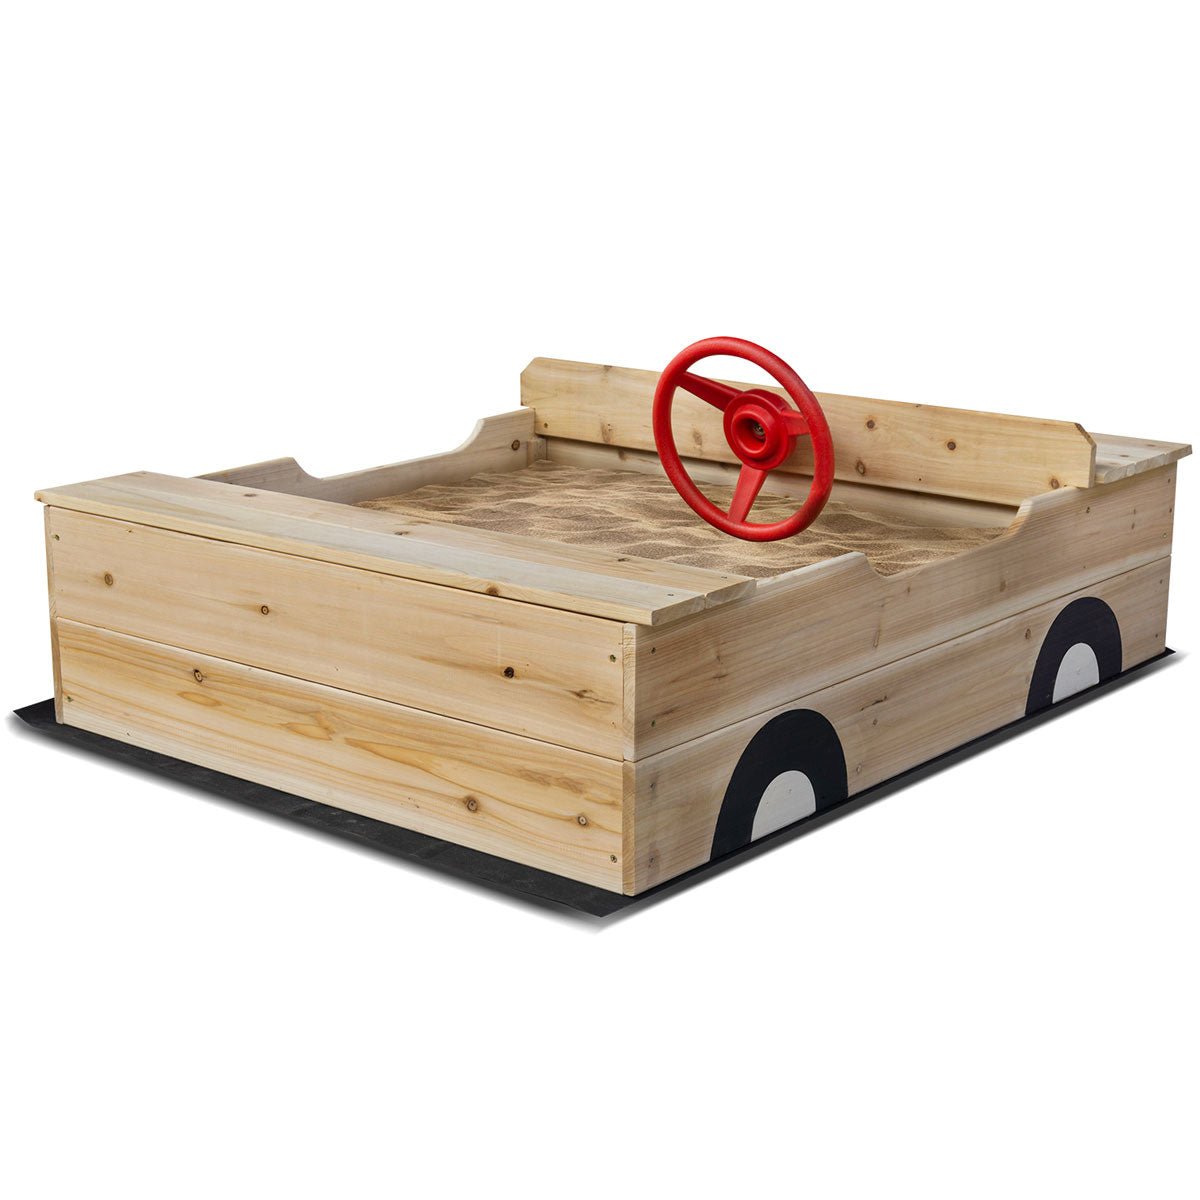 Lifespan Kids Outback Interactive Sandpit with Steering wheel